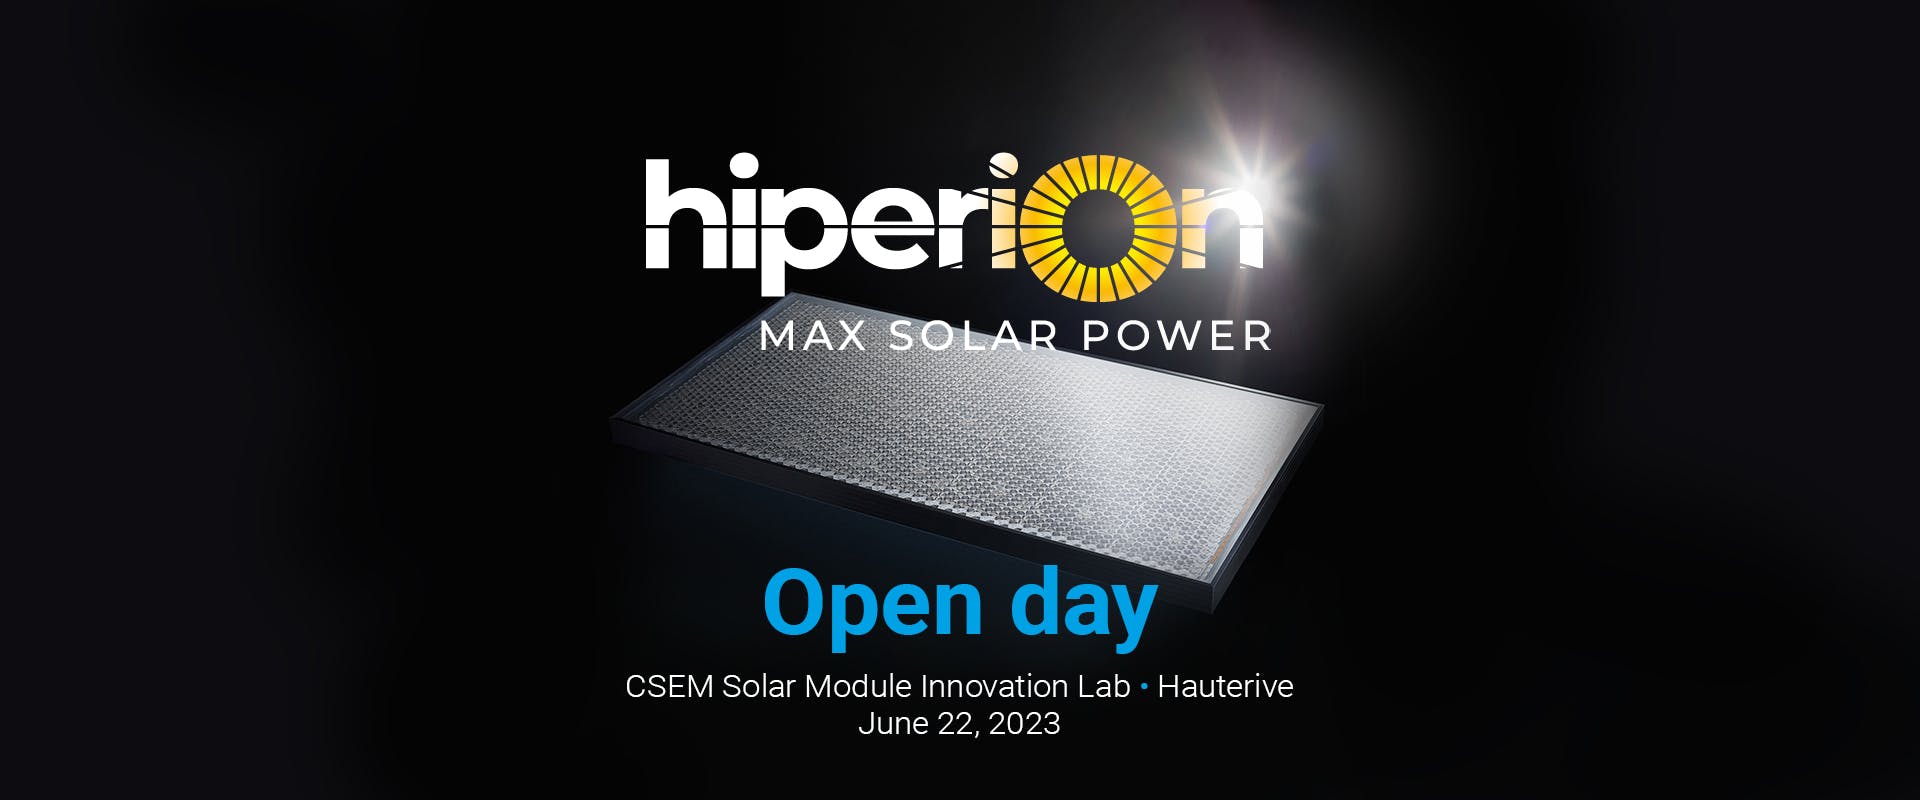  HIPERION will open the doors to their pilot production line on Thursday, June 22, 2023